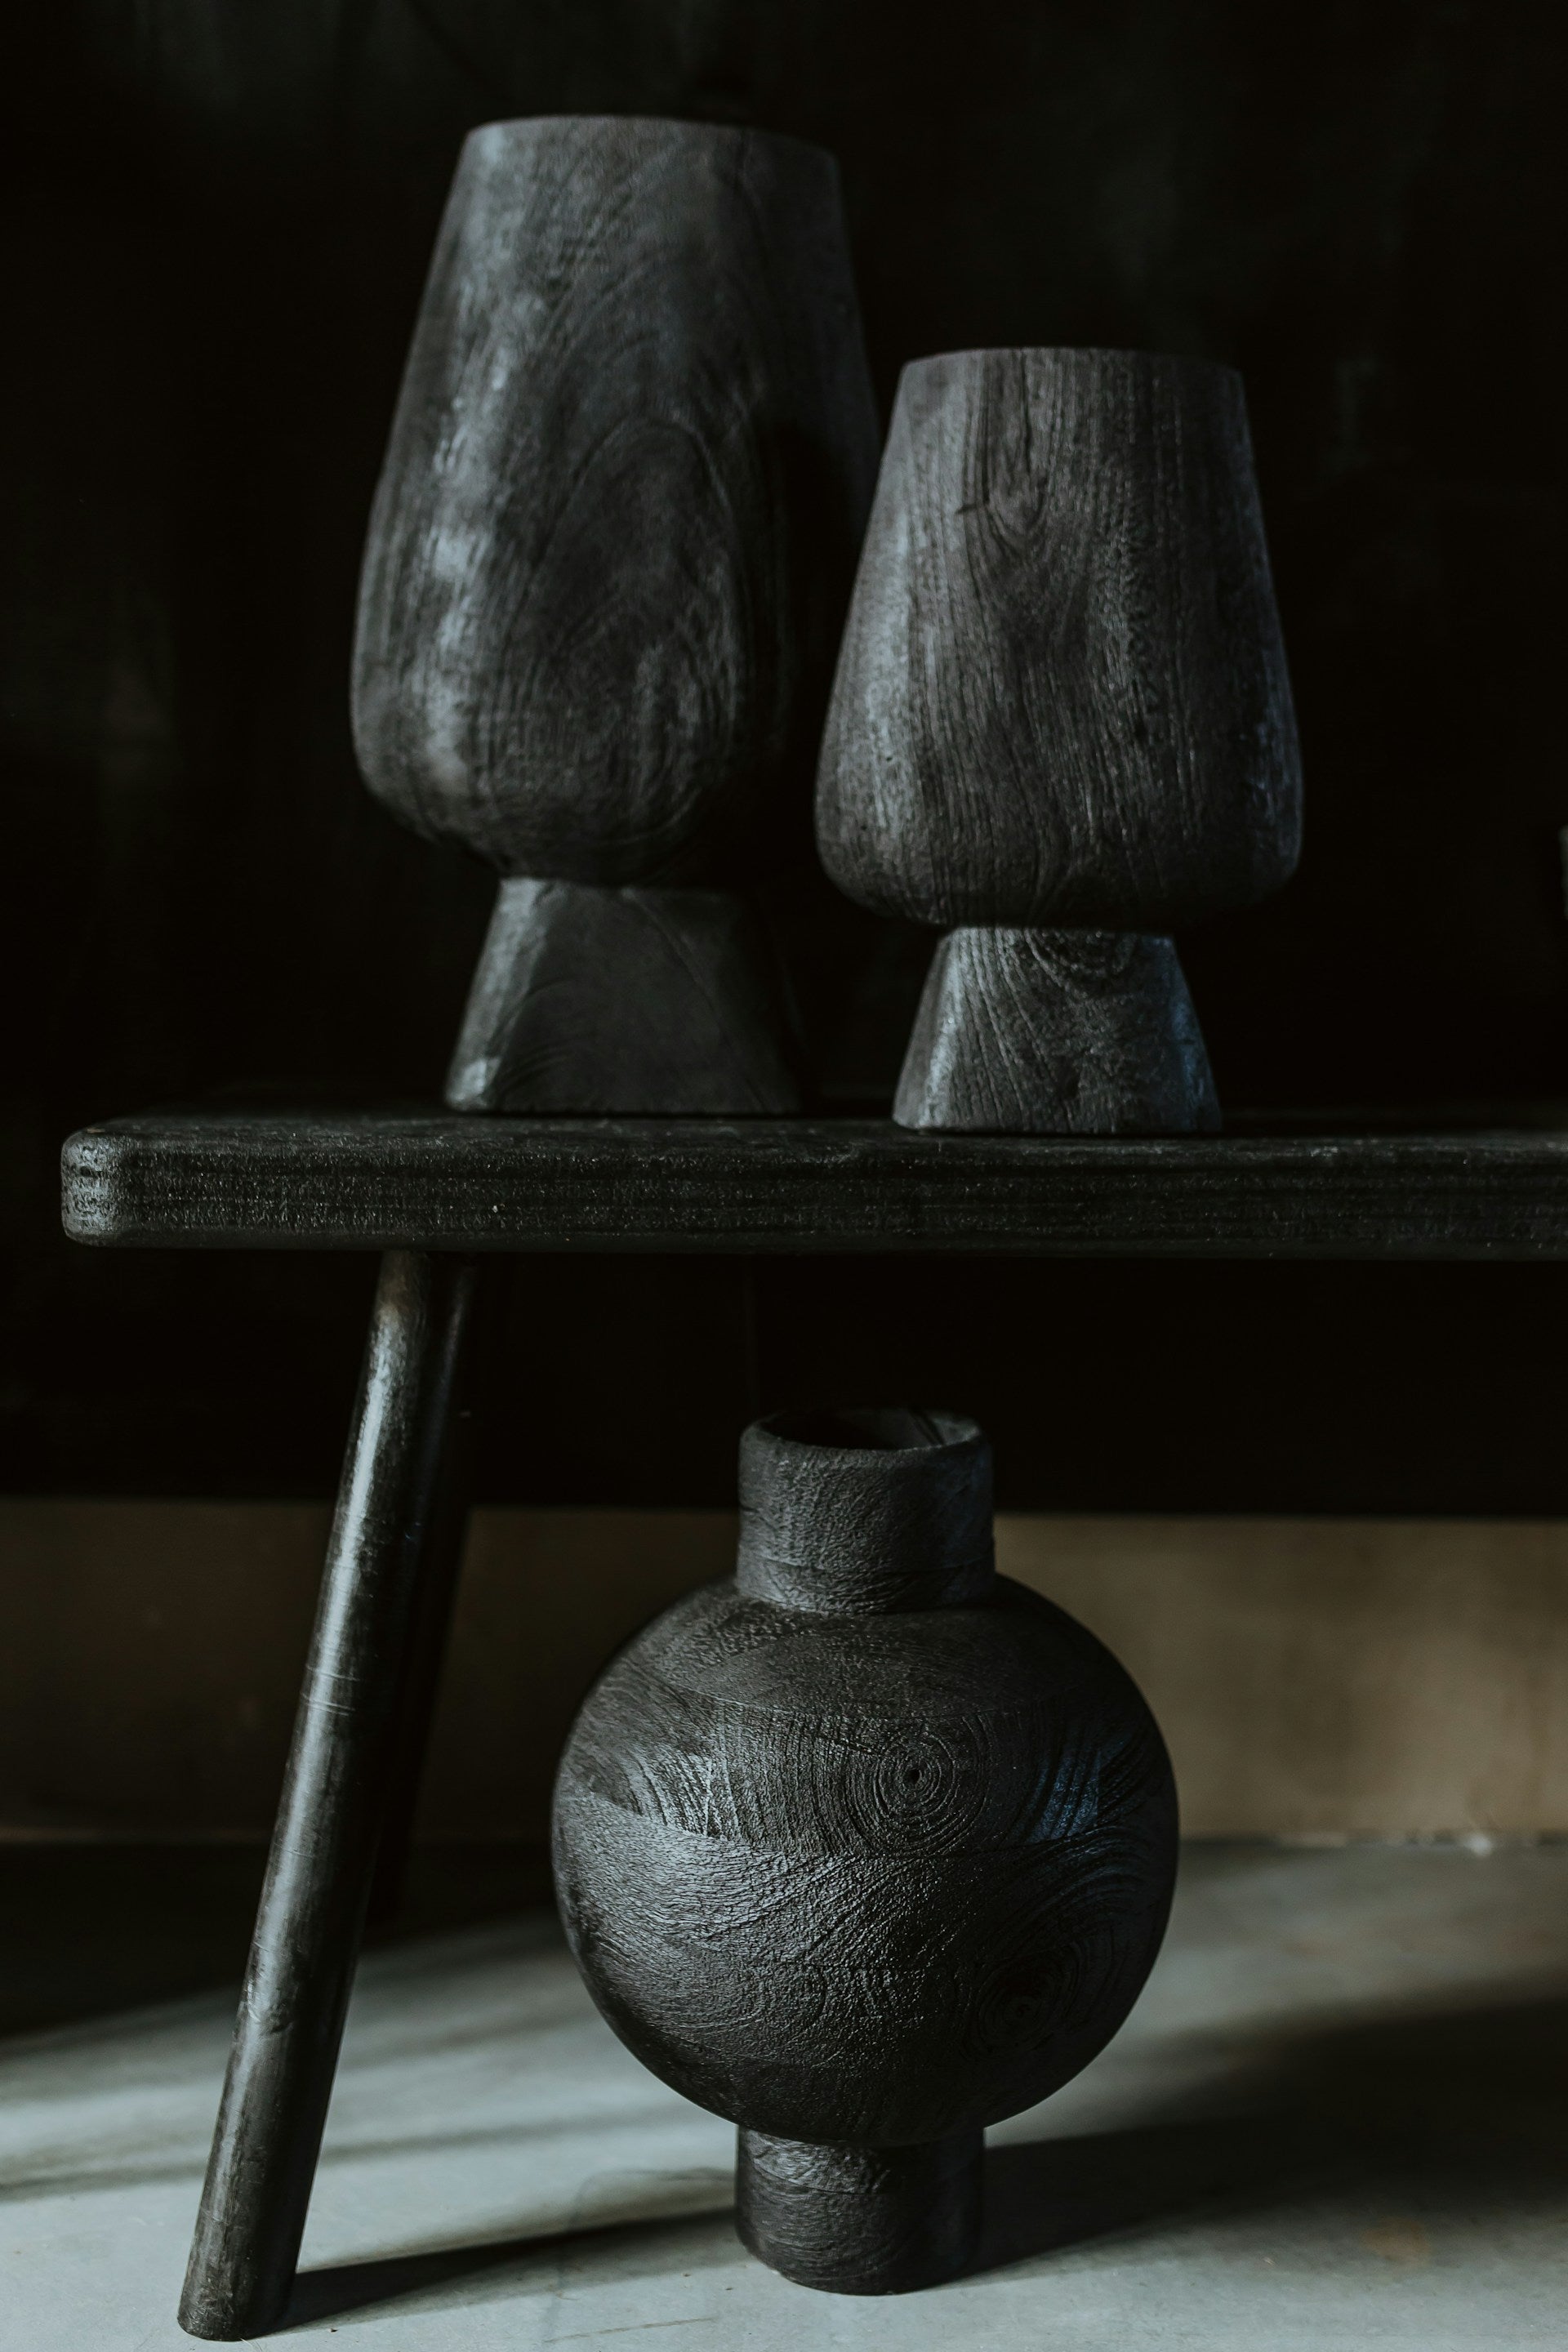 Three black vases, two are sitting on a wooden bench.